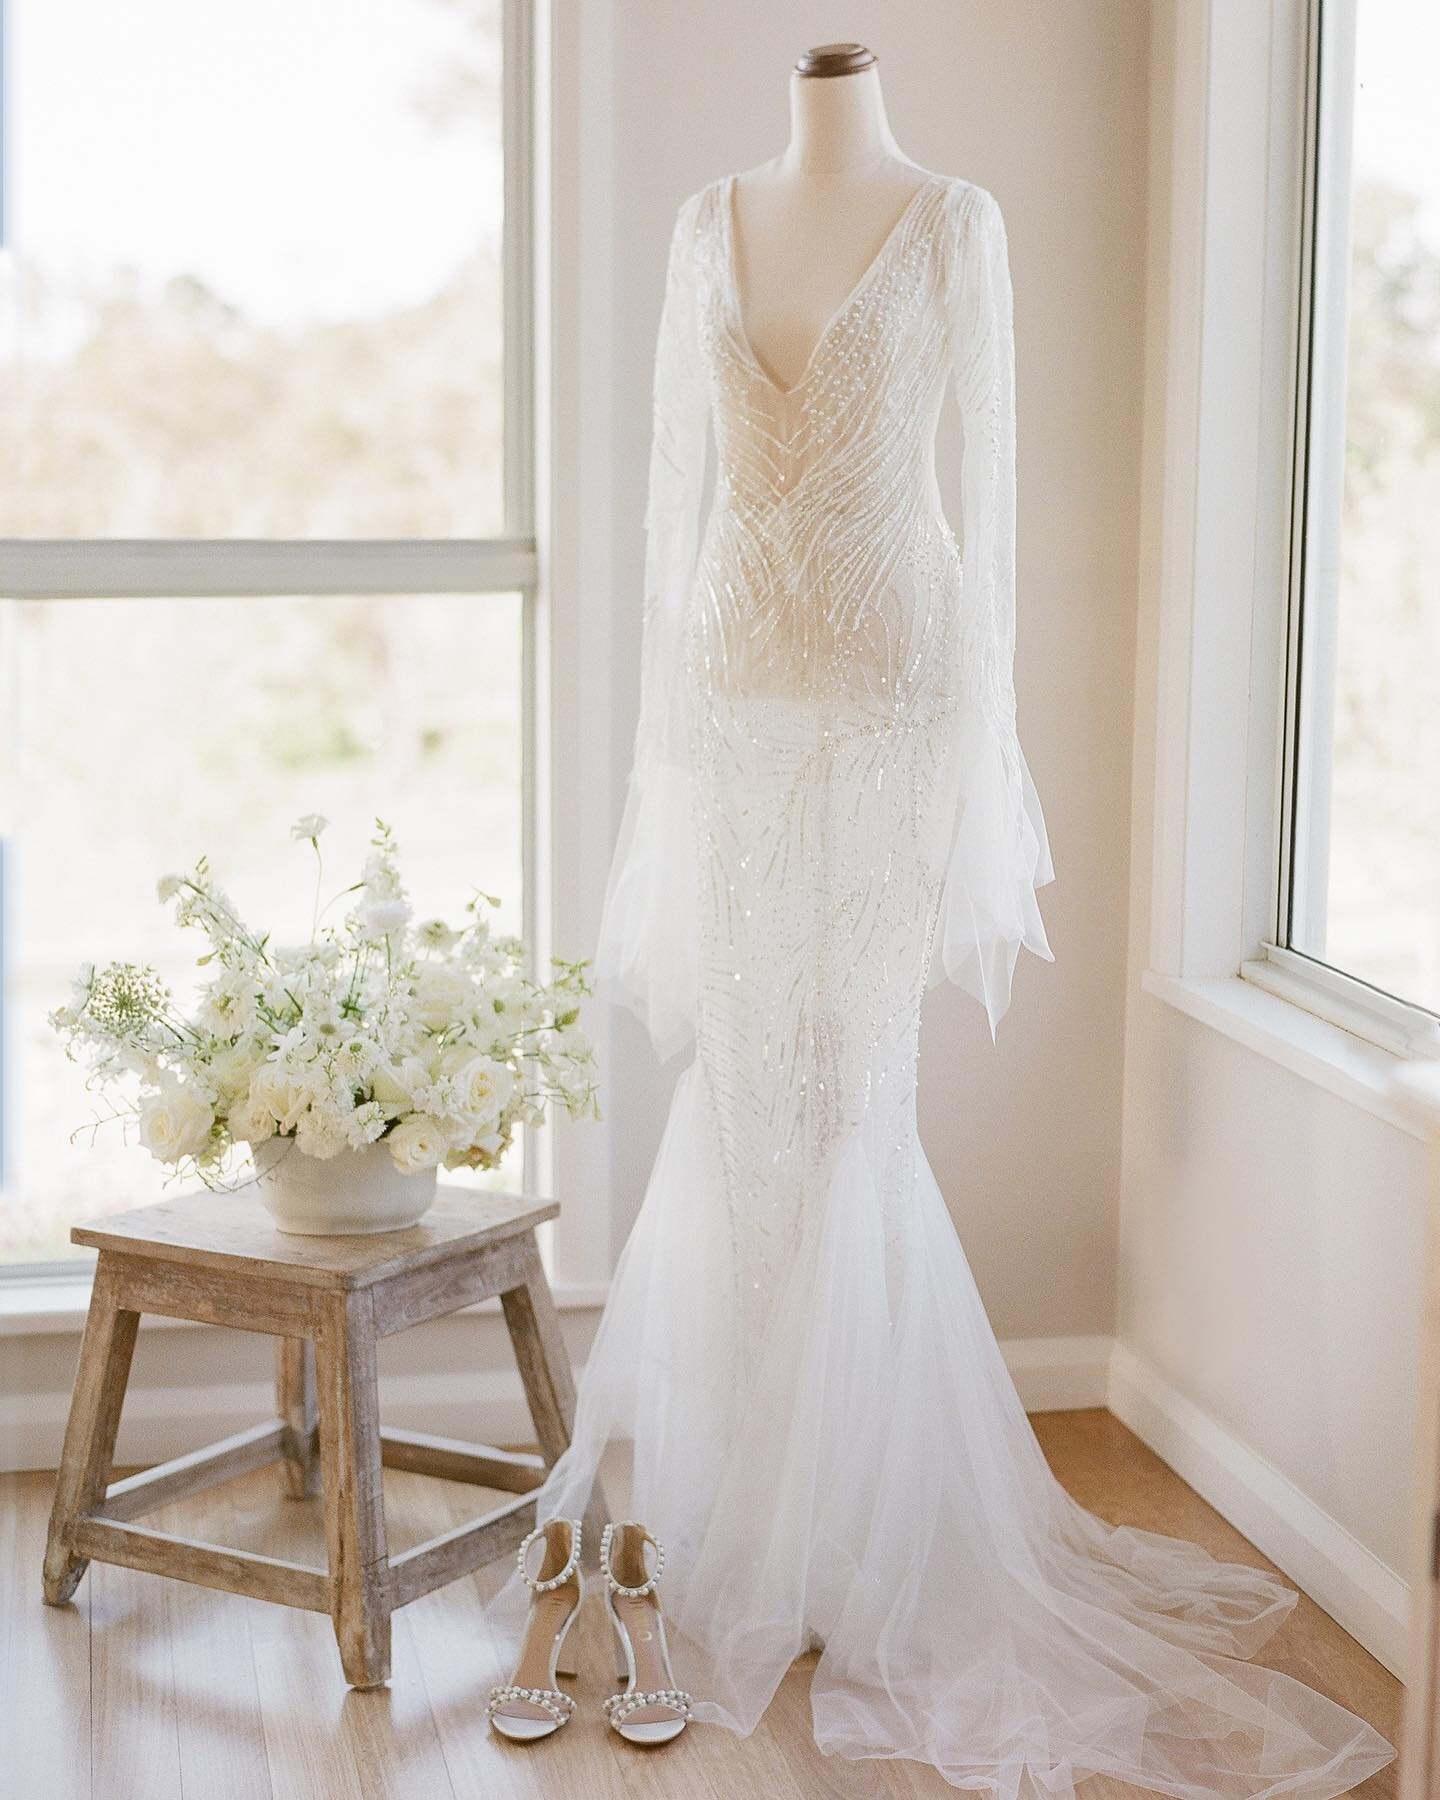 Soft window light on this gorgeous gown by @zanzisbridalcouture 
Styling &amp; coordination @aravellaeventdesign 
Florals @riverdalefarmalbany 
Shoes @georgiesbridalshoes